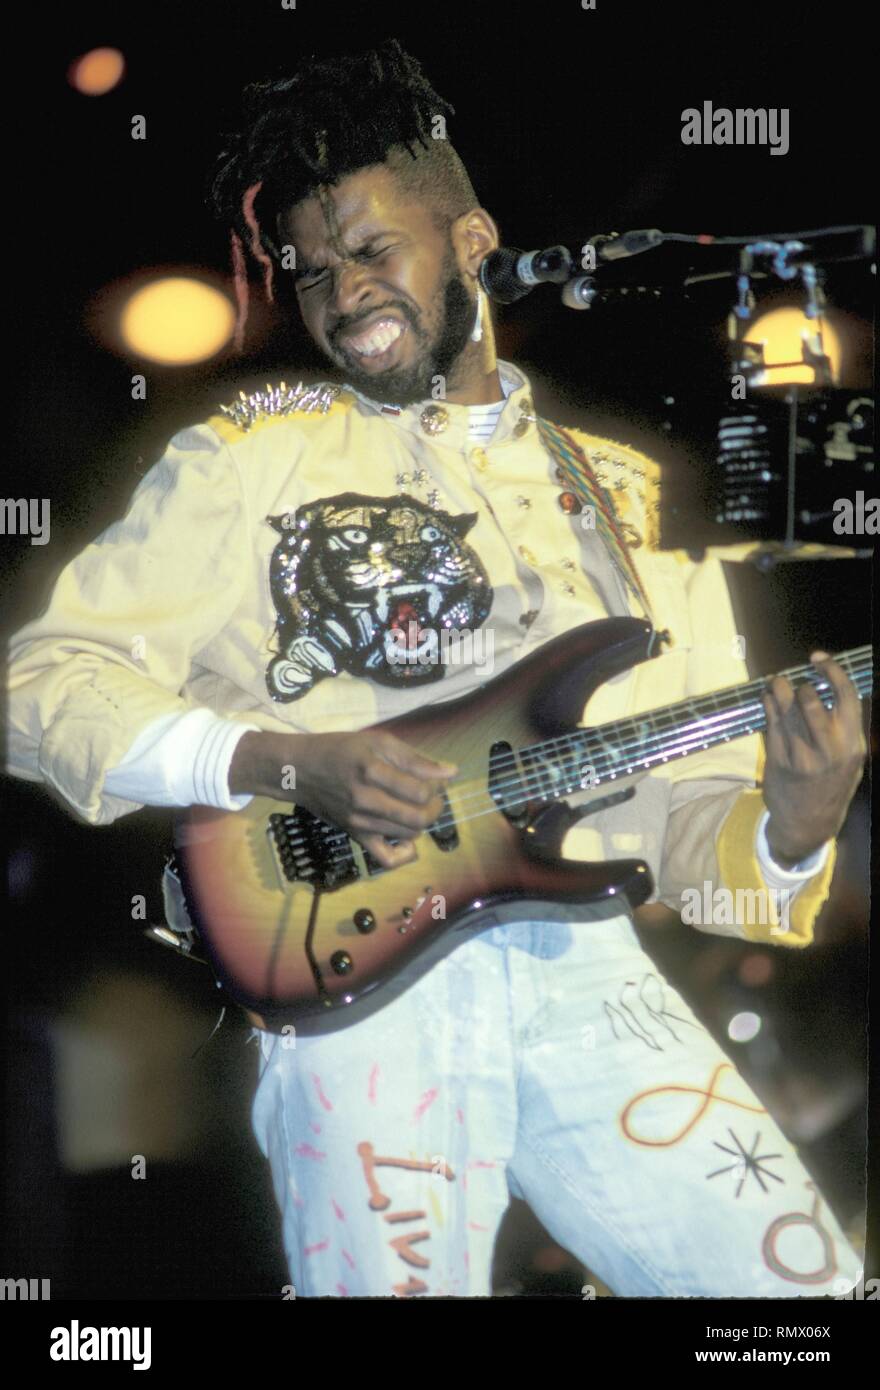 Guitarist Vernon Reid of the funk metal band Living Colour is shown performing on stage during a 'live' concert appearance. Stock Photo